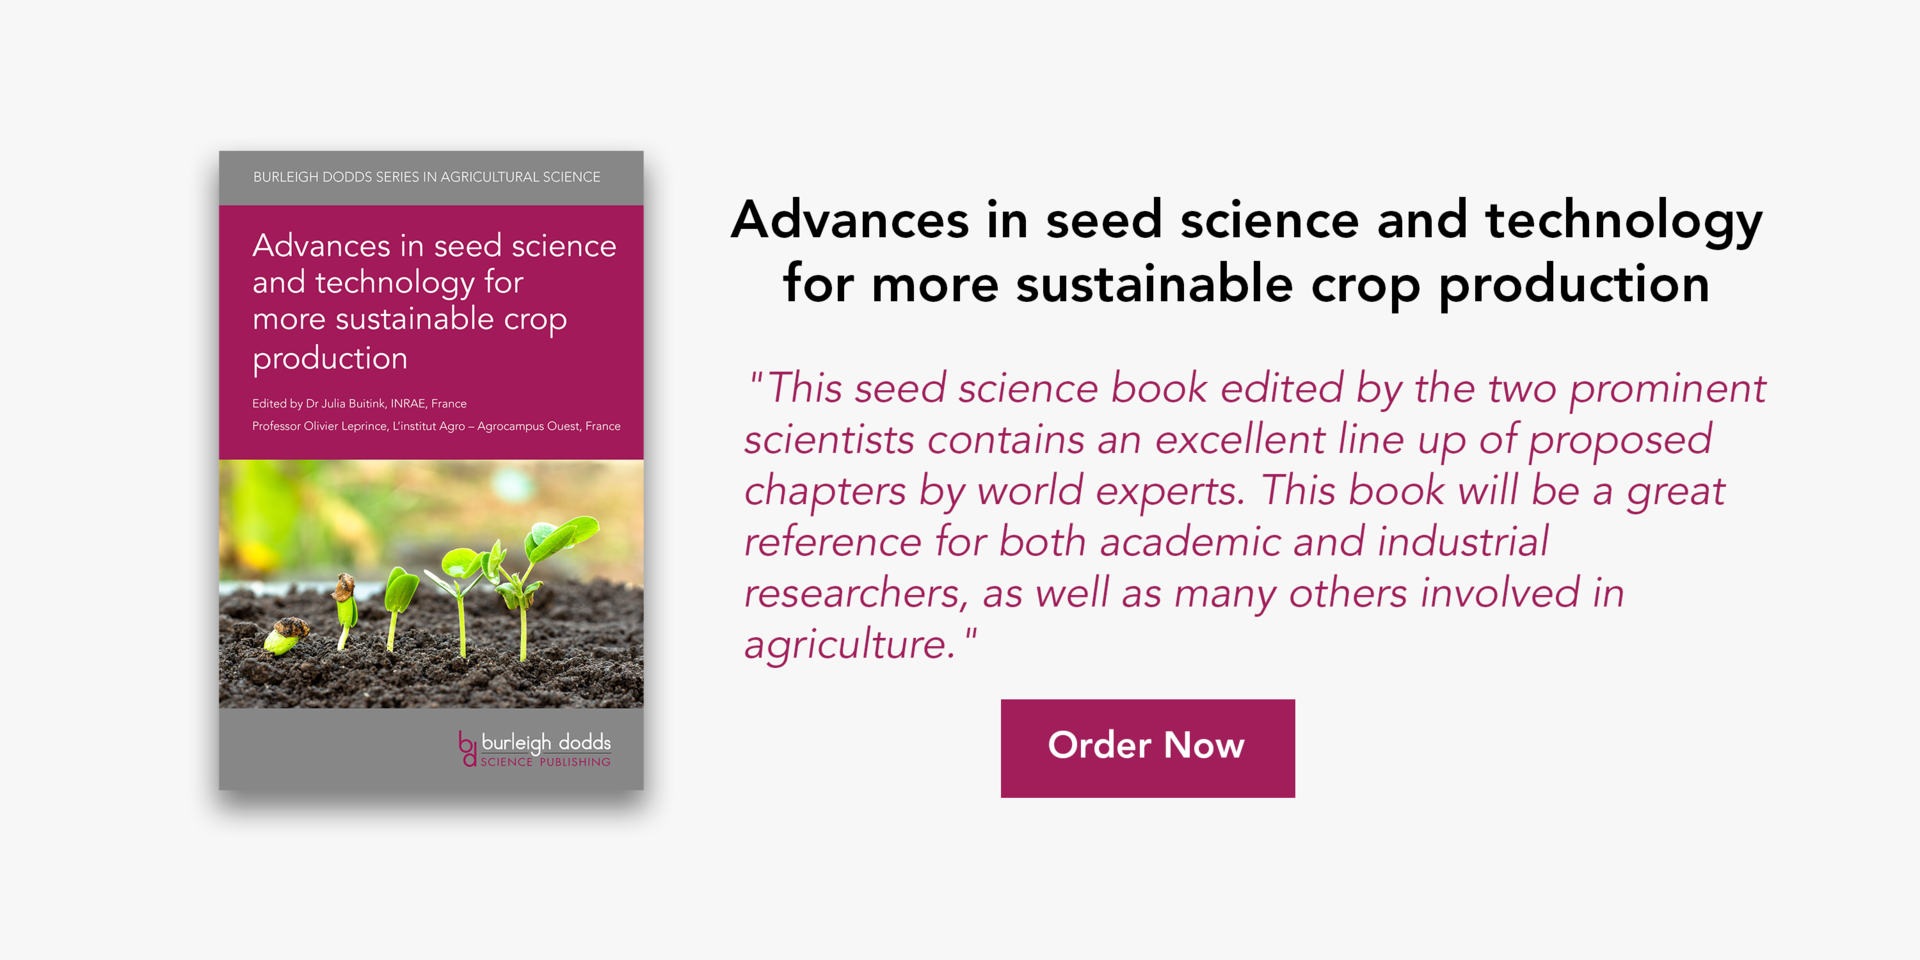 Advances in seed science and technology for more sustainable crop production